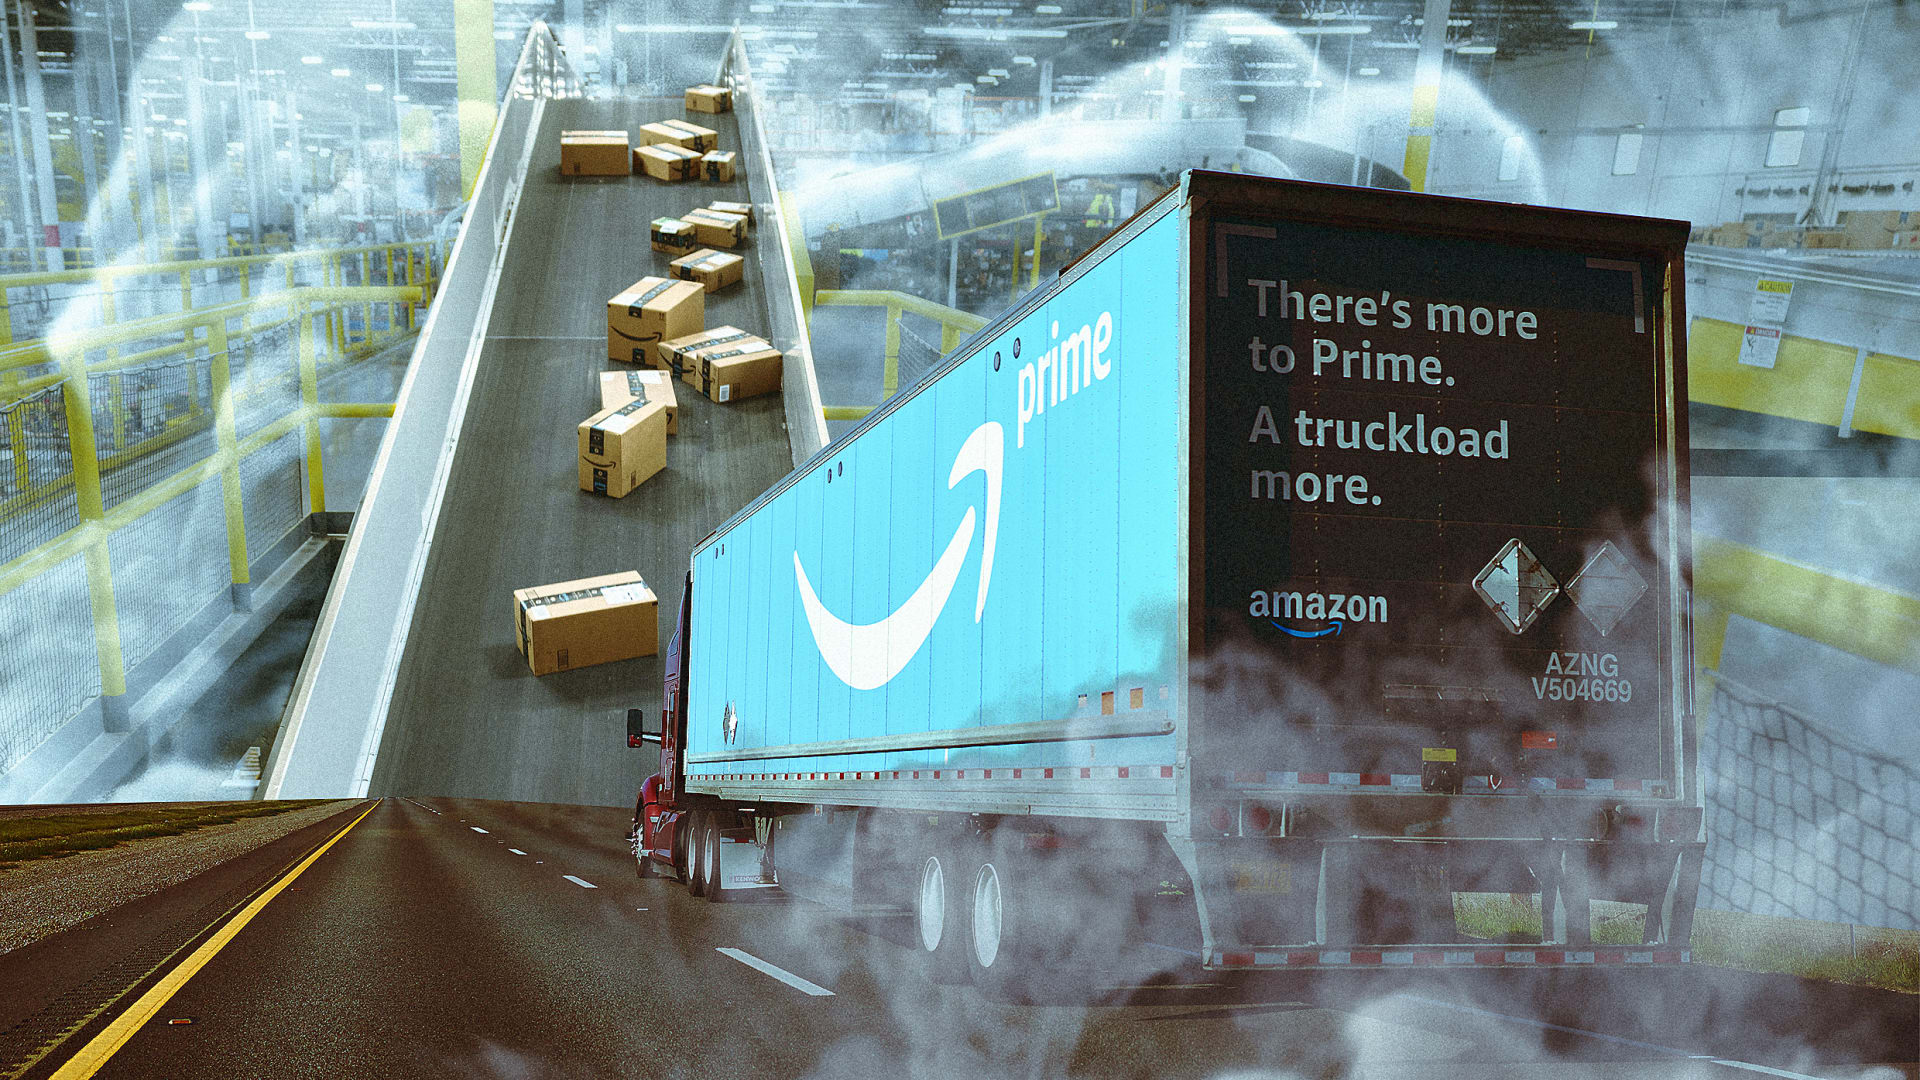 Amazon quietly ditched its plan to make half of all shipments carbon neutral by 2030